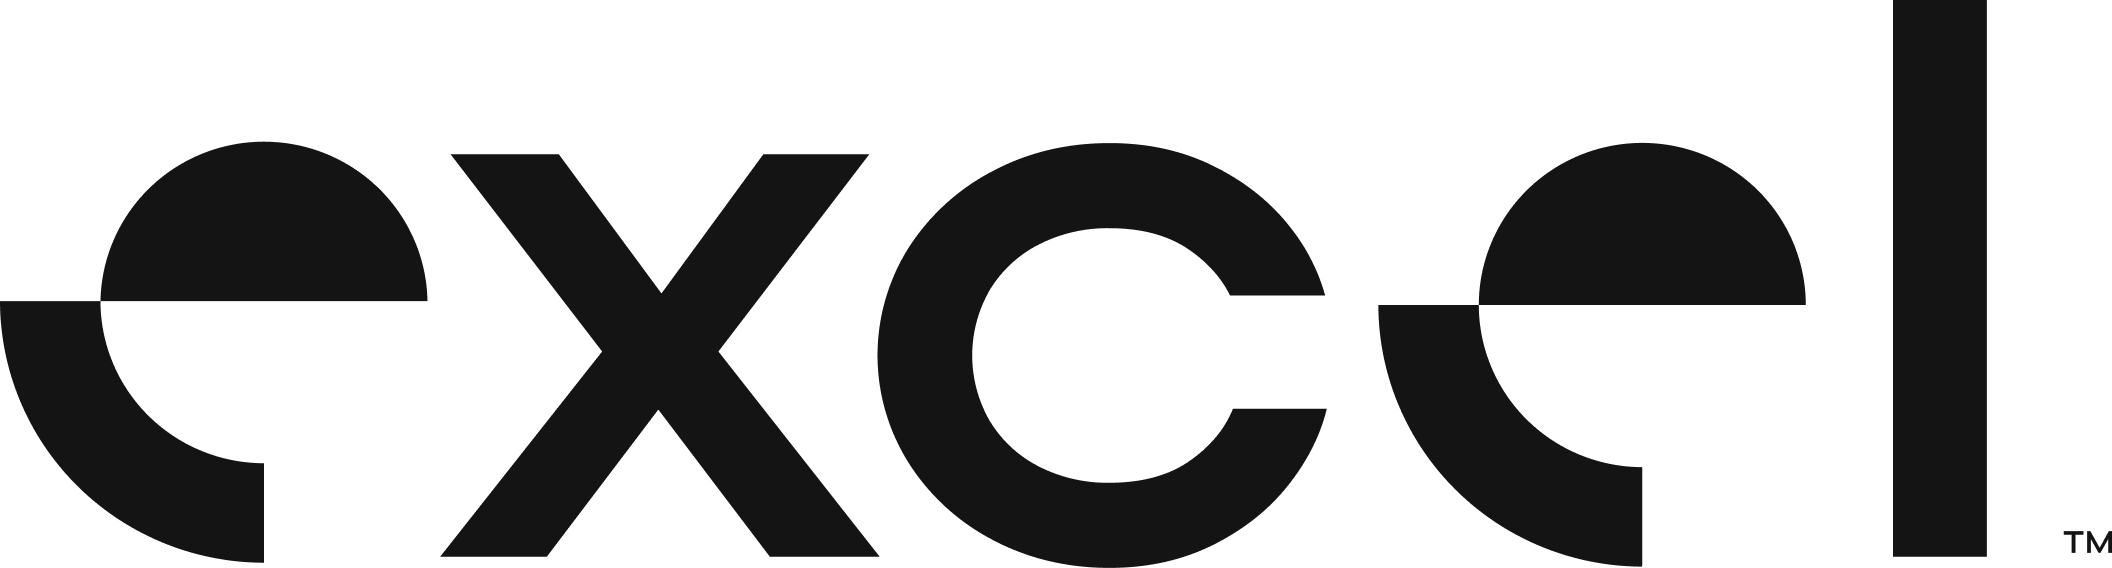 NEW Excel Impact Logo.png